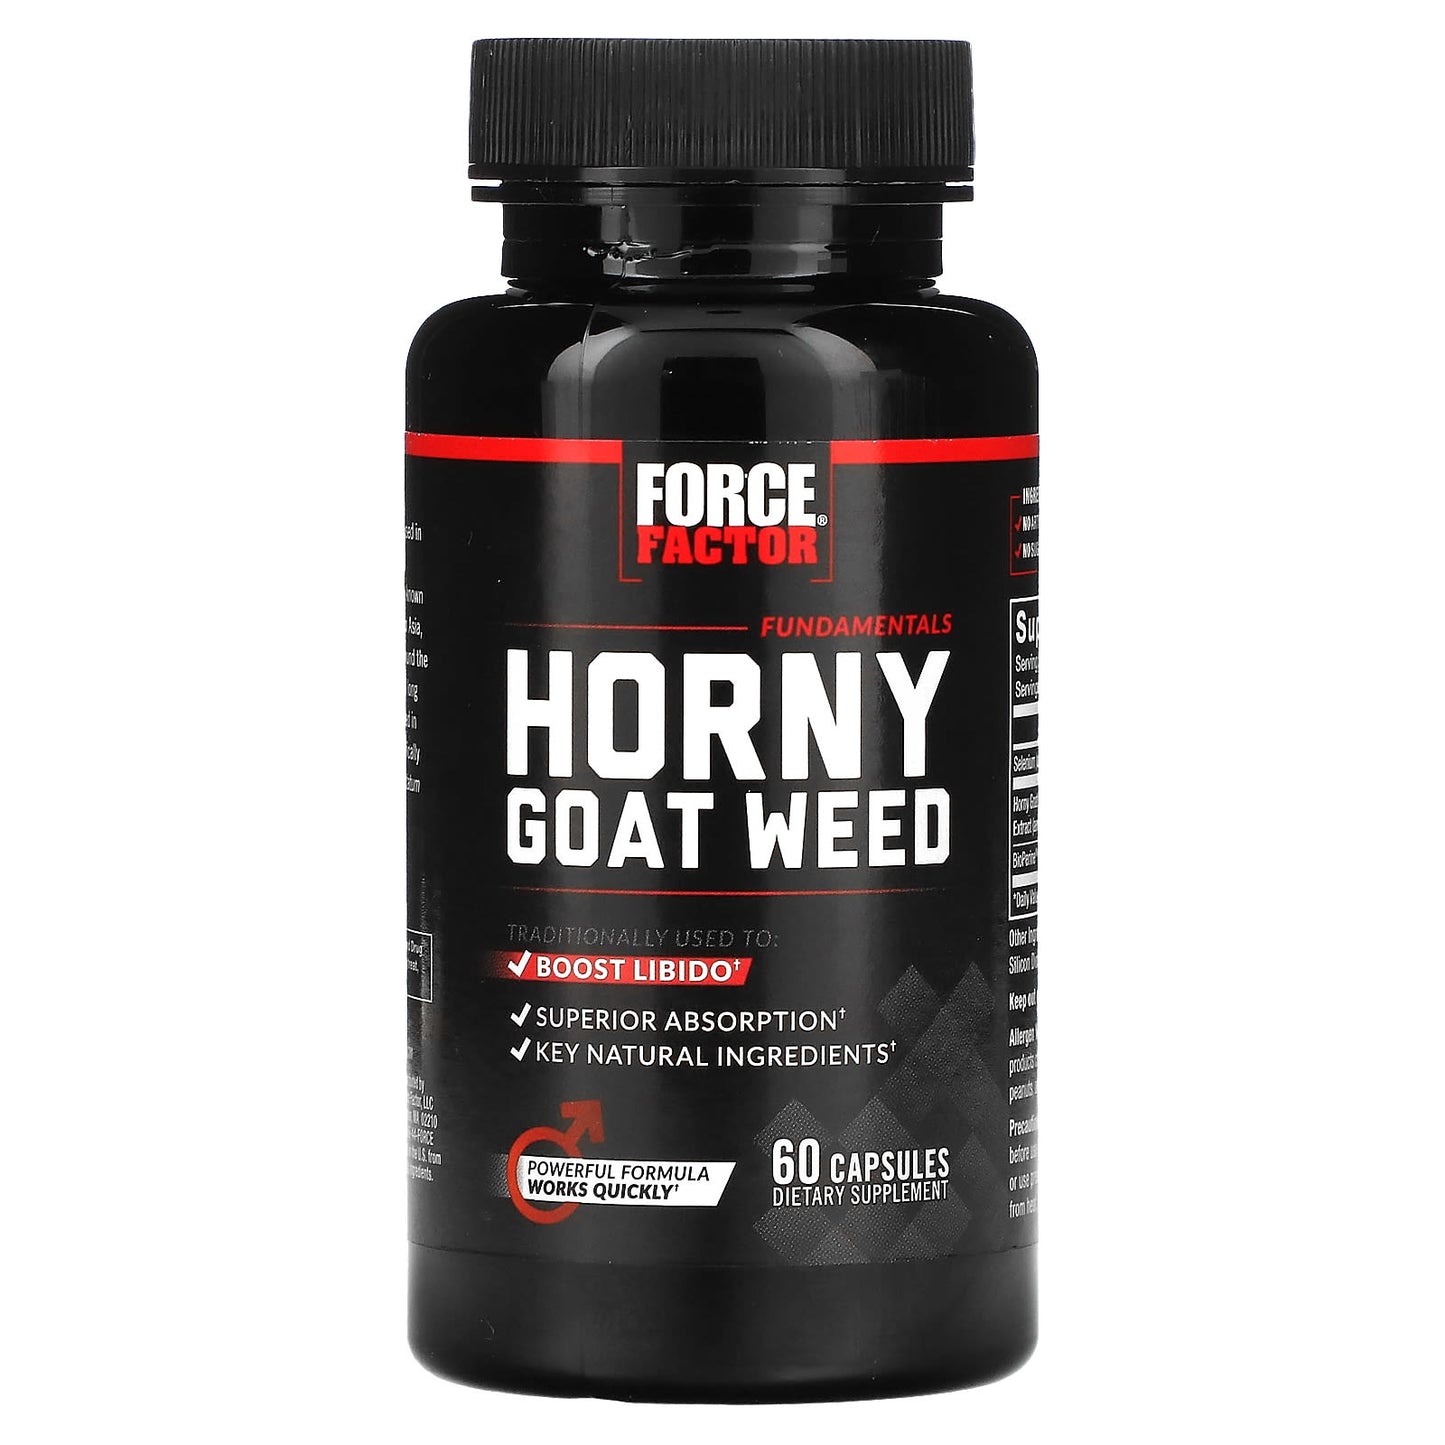 Force Factor, Fundamentals, Horny Goat Weed, 60 Capsules